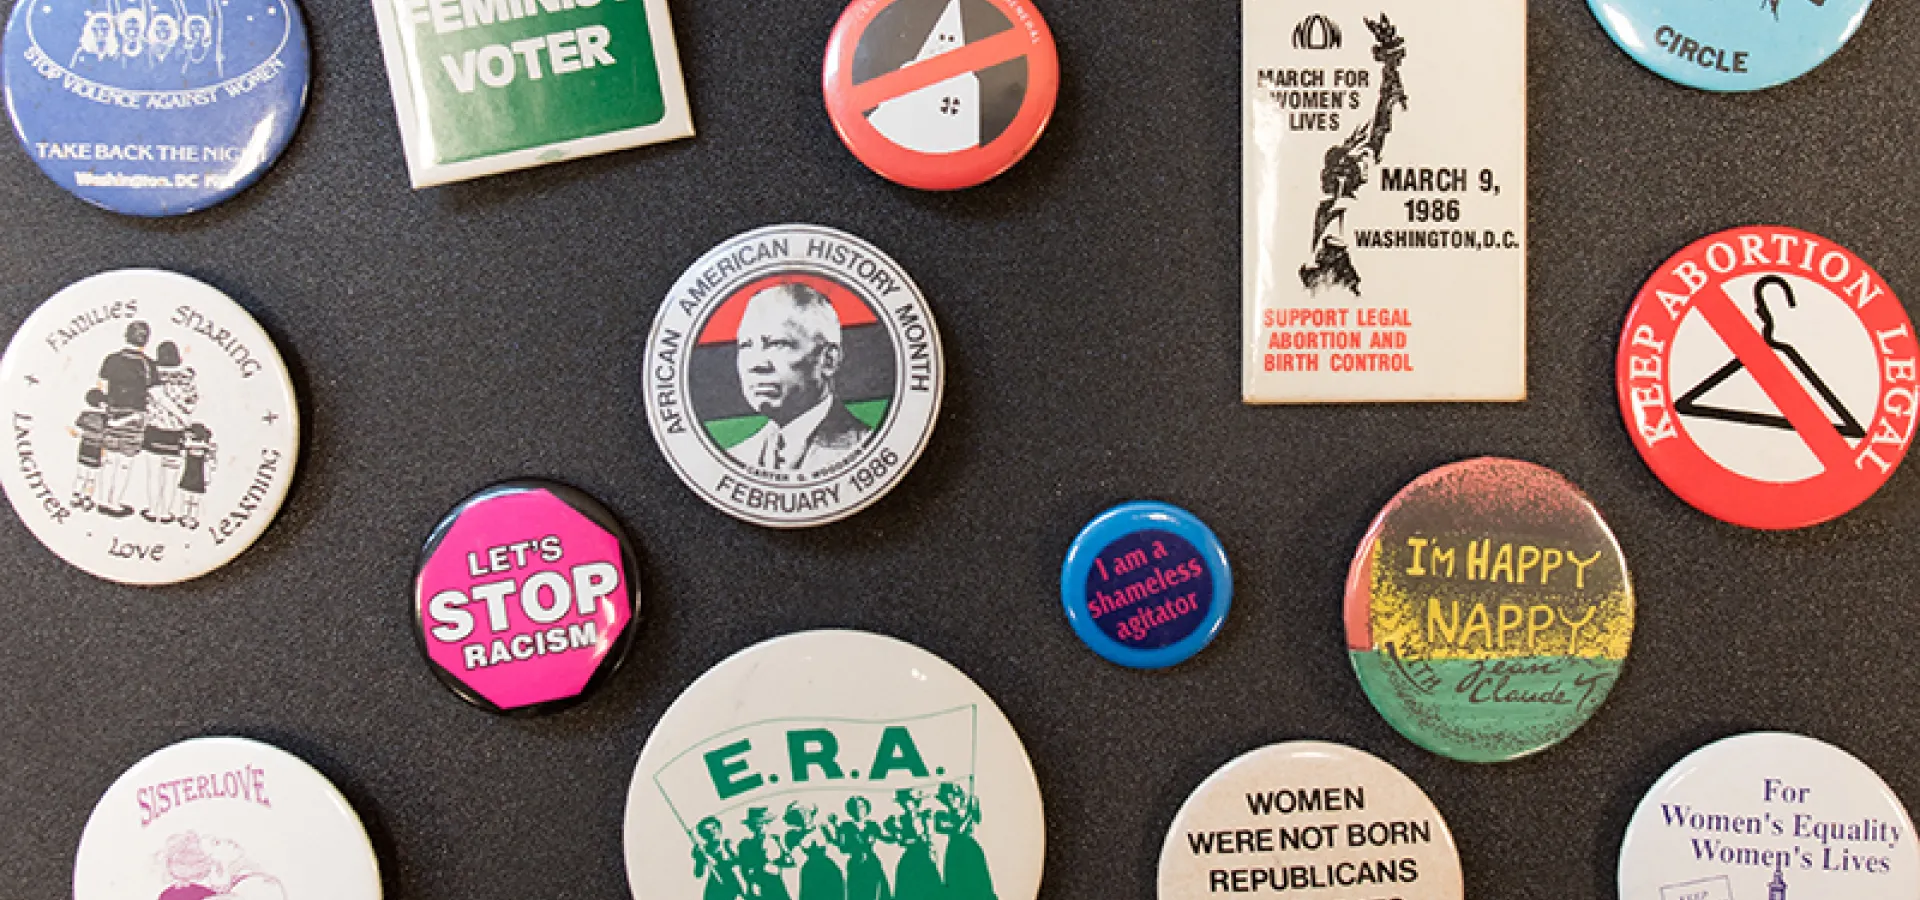 Buttons from the Sophia Smith Collection of Women's History